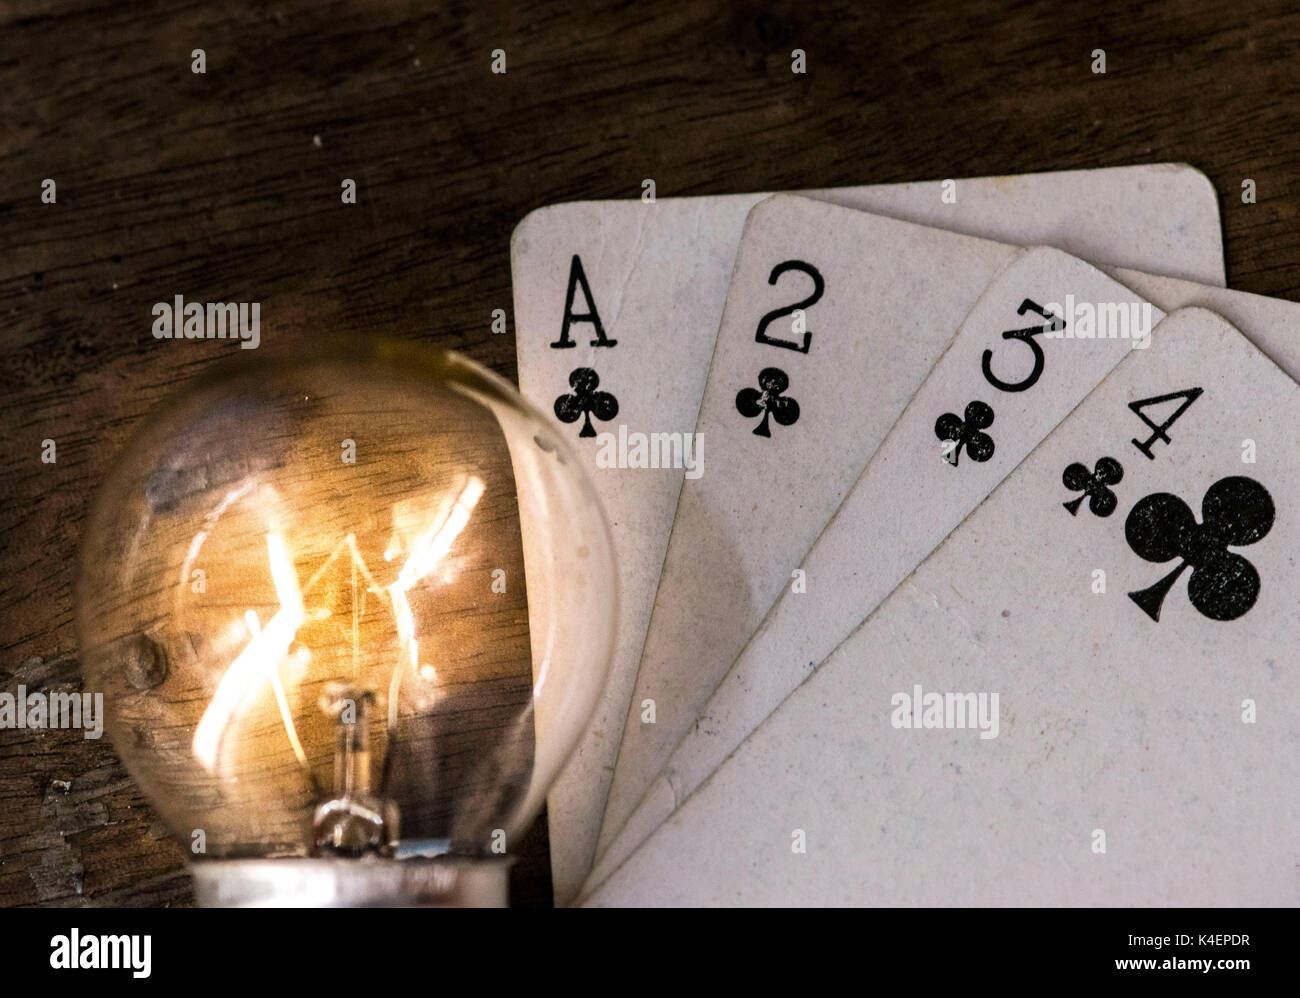 Lit light bulb and white playing cards, face up, on top of a wooden surface, gambling and winning concept idea Stock Photo